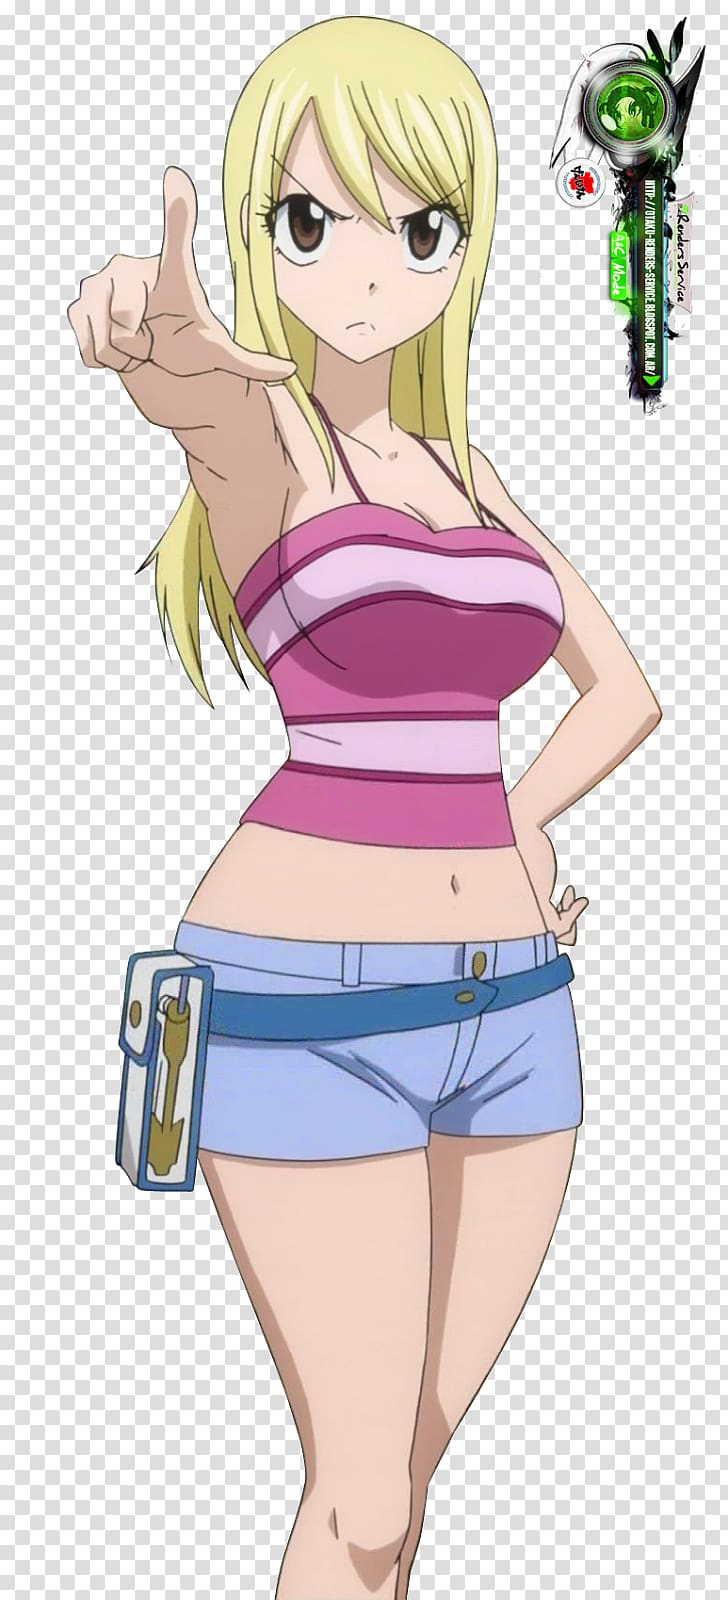 Lucy Heartfilia Fairy Tail Natsu Dragneel Character Anime PNG